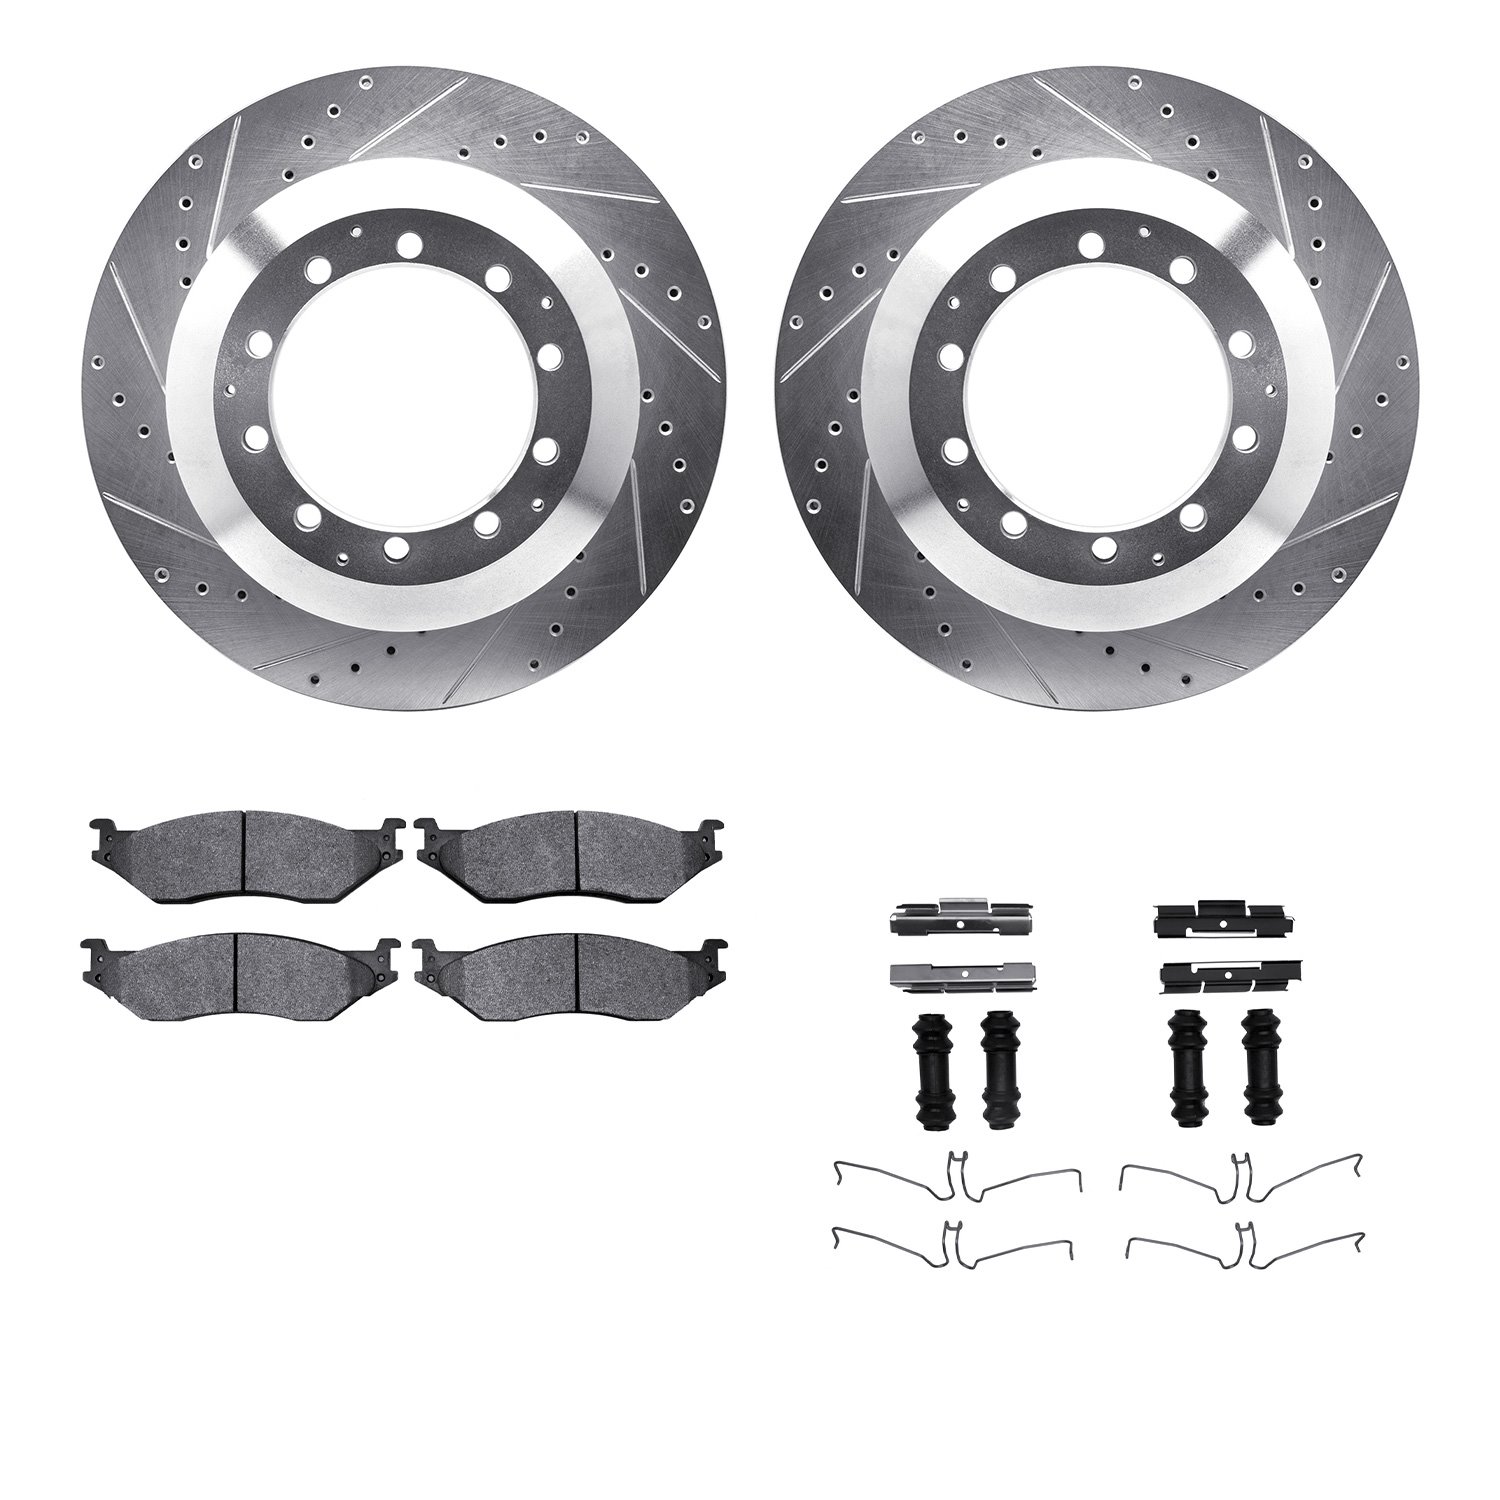 7412-40023 Drilled/Slotted Brake Rotors with Ultimate-Duty Brake Pads Kit & Hardware [Silver], 2005-2017 Multiple Makes/Models,